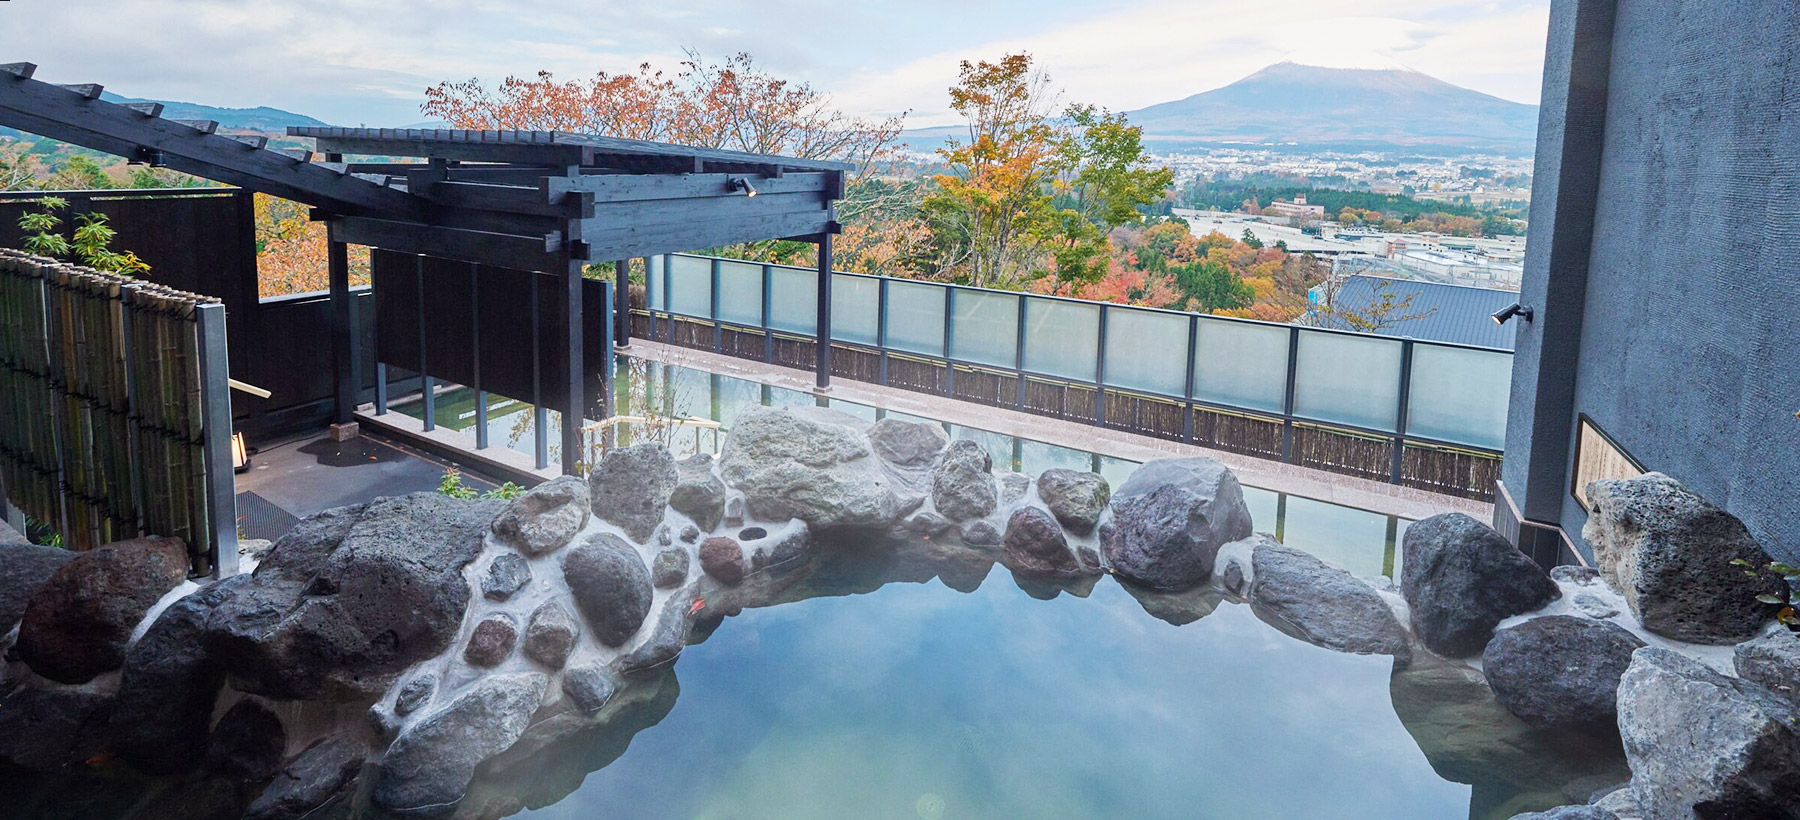 Gotemba Premium Outlets Enjoy a Day Trip Hot Spring